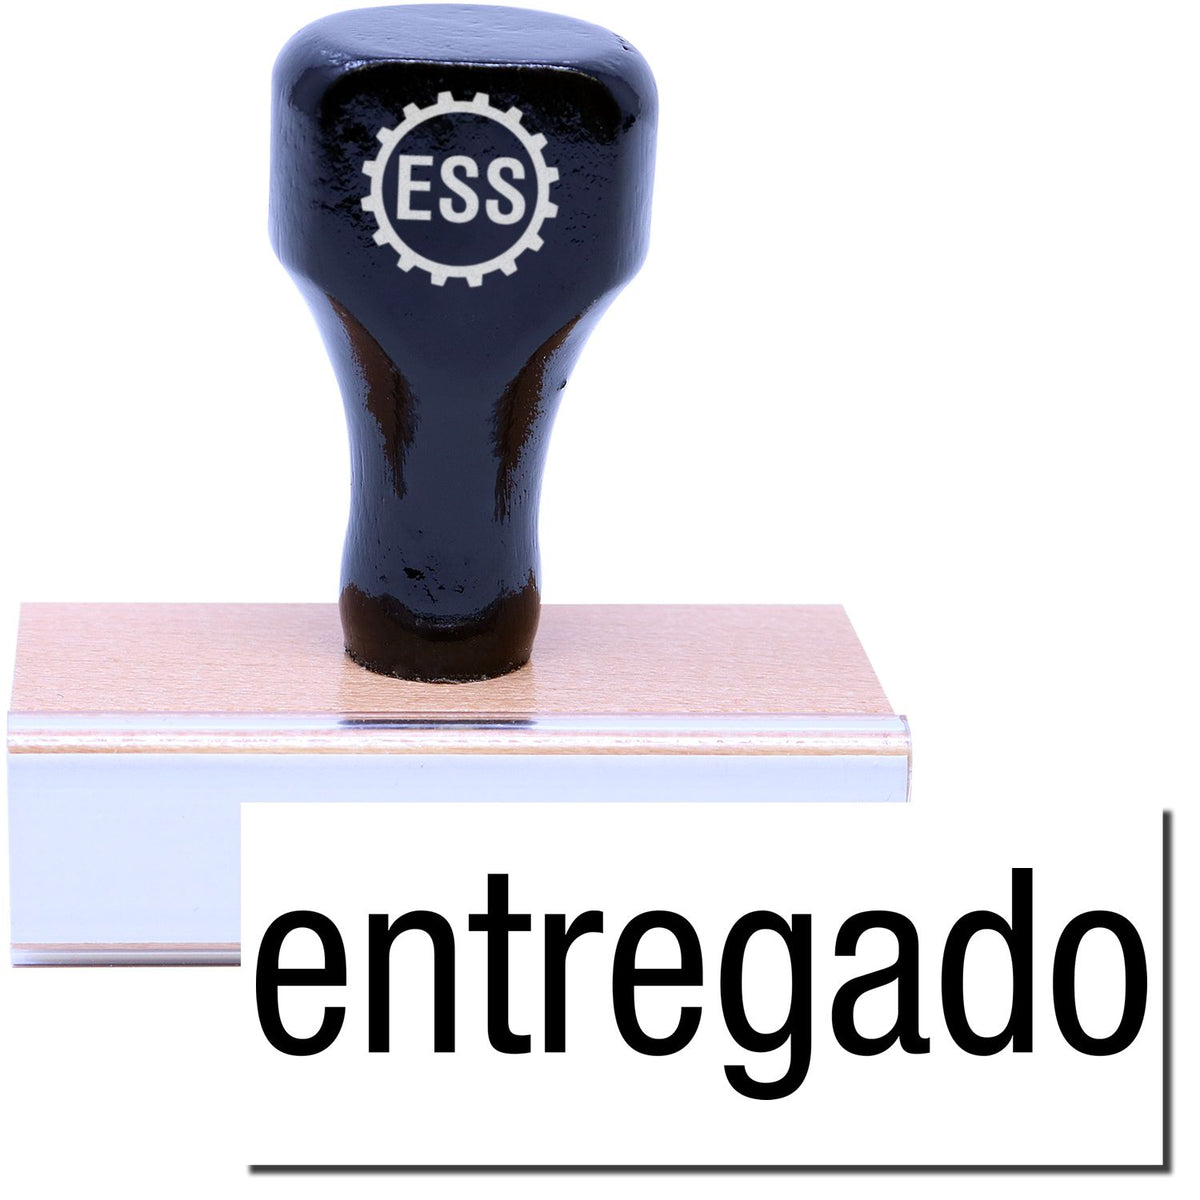 A stock office rubber stamp with a stamped image showing how the text &quot;entregado&quot; in a large lowercase text is displayed after stamping.